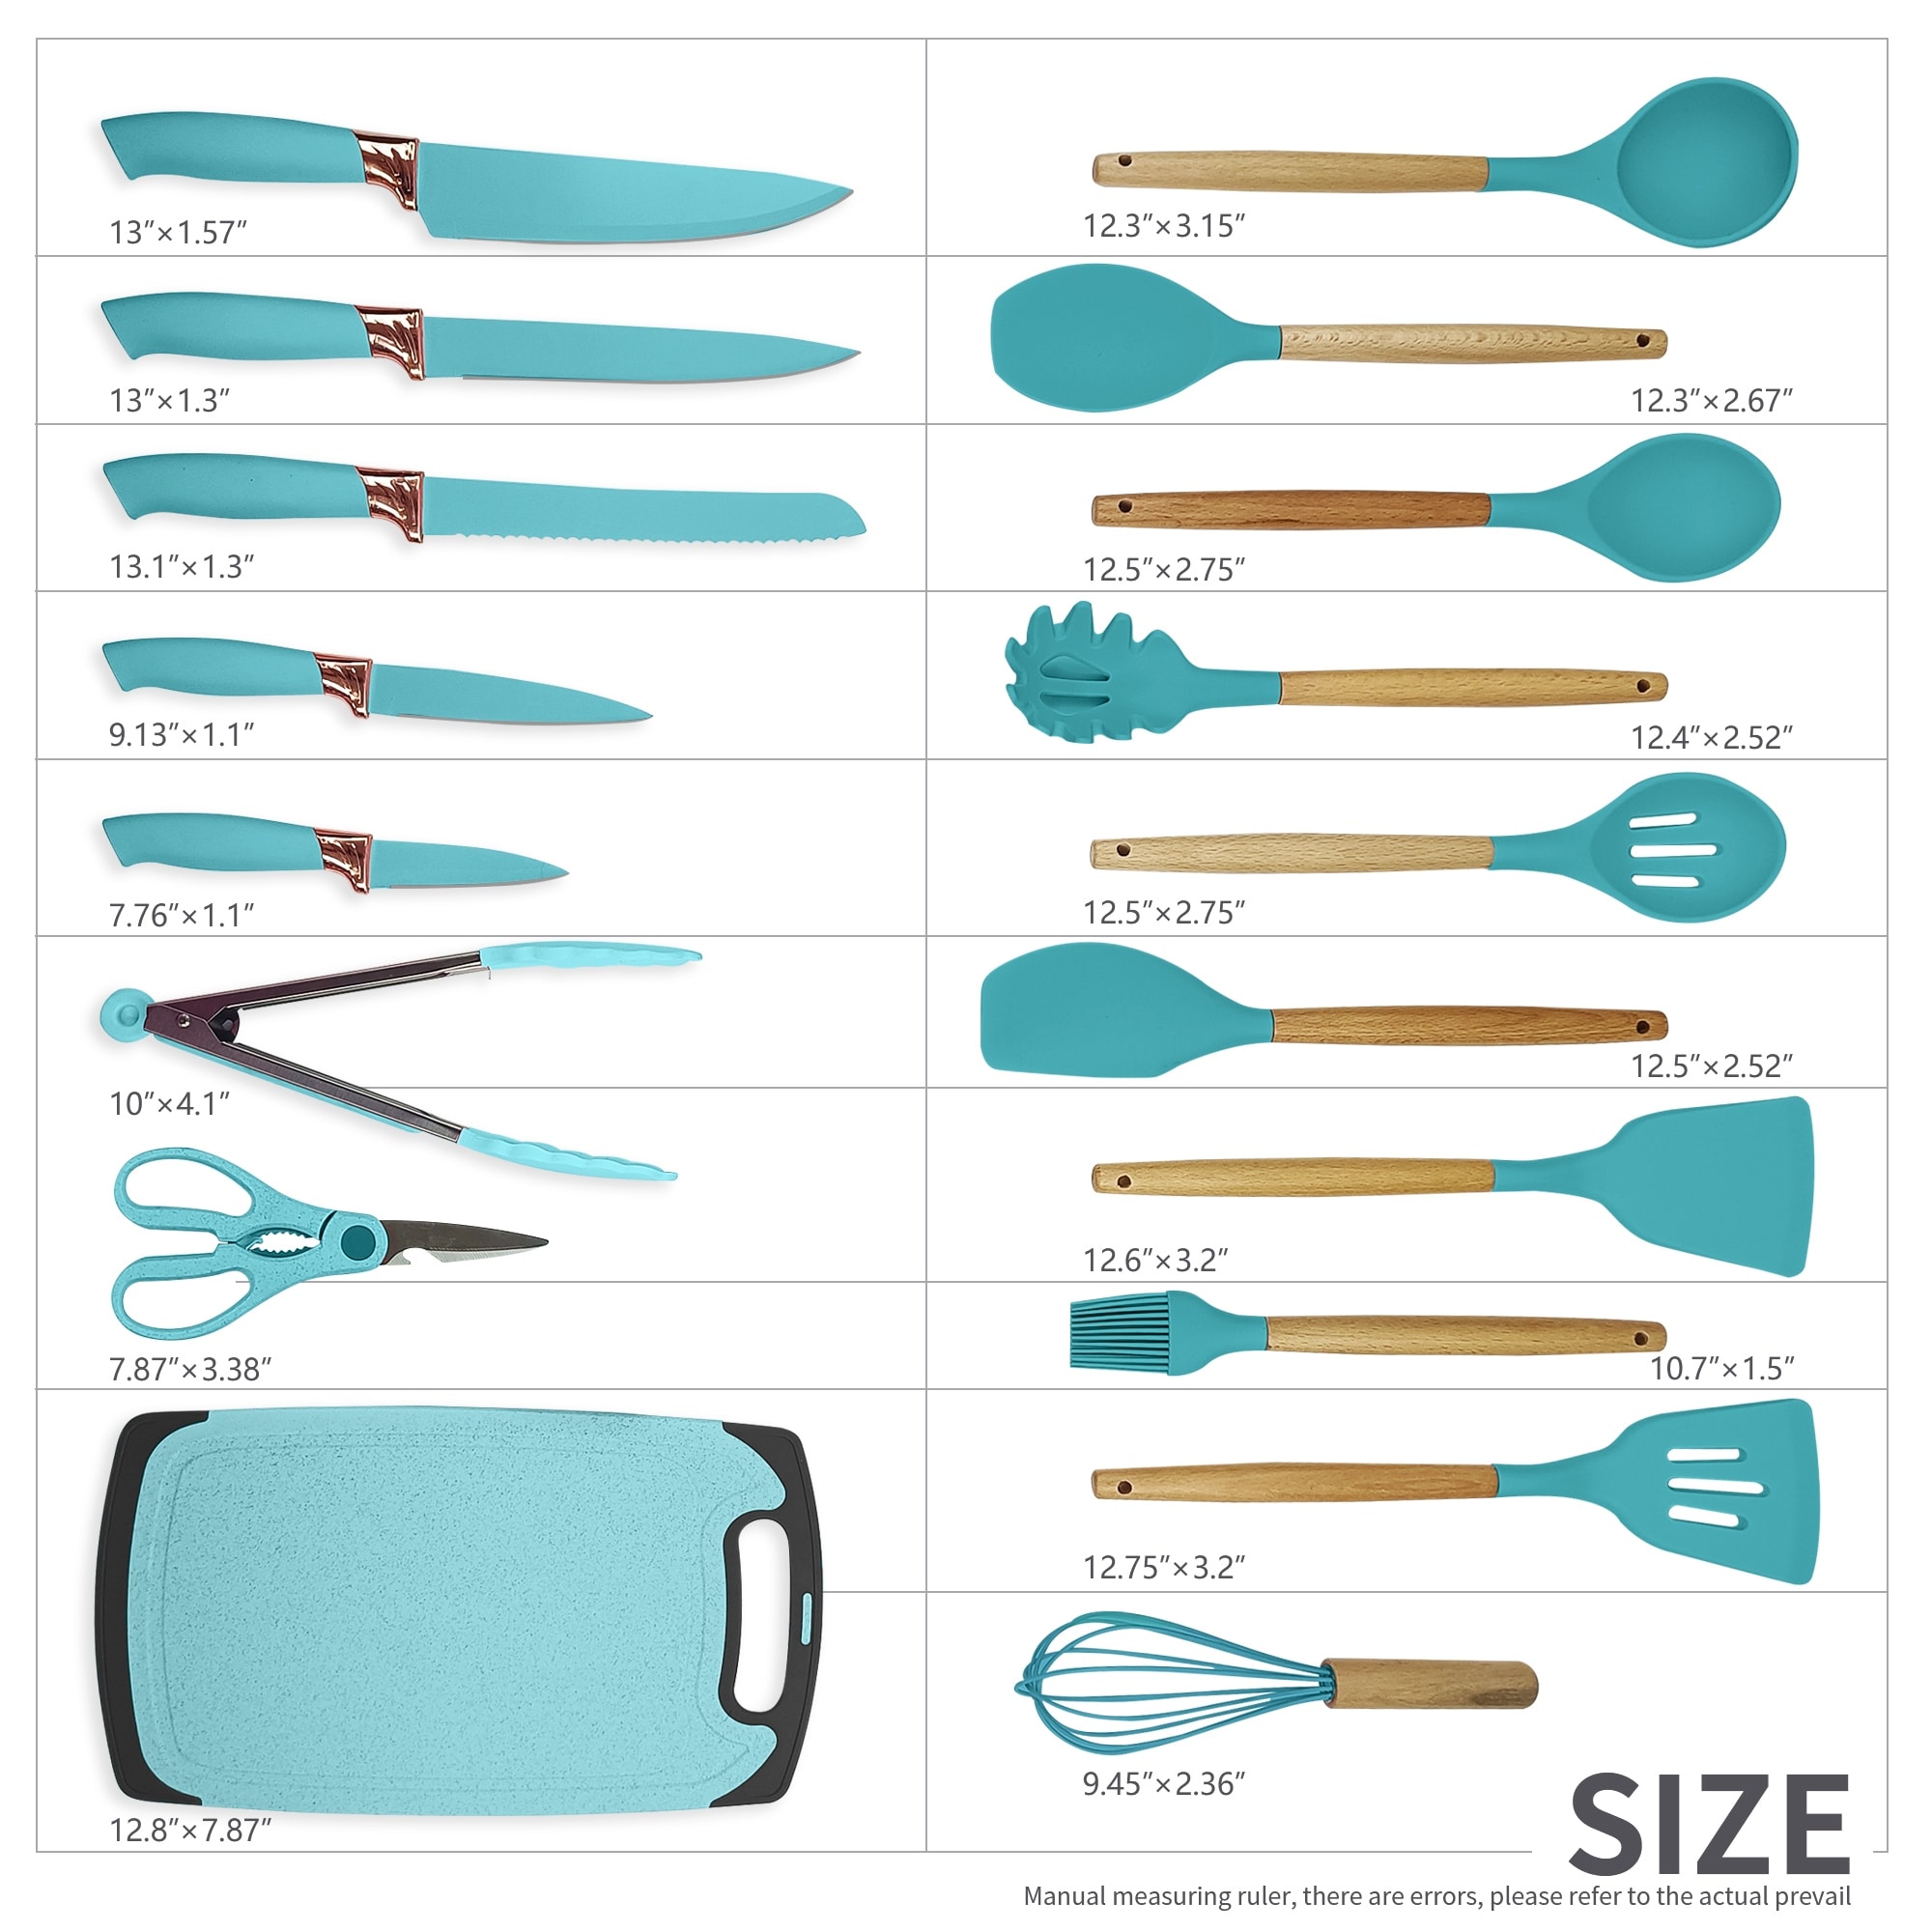 19pcs Silicone Kitchenware Set. . . . Price: N28,000 . . . How to